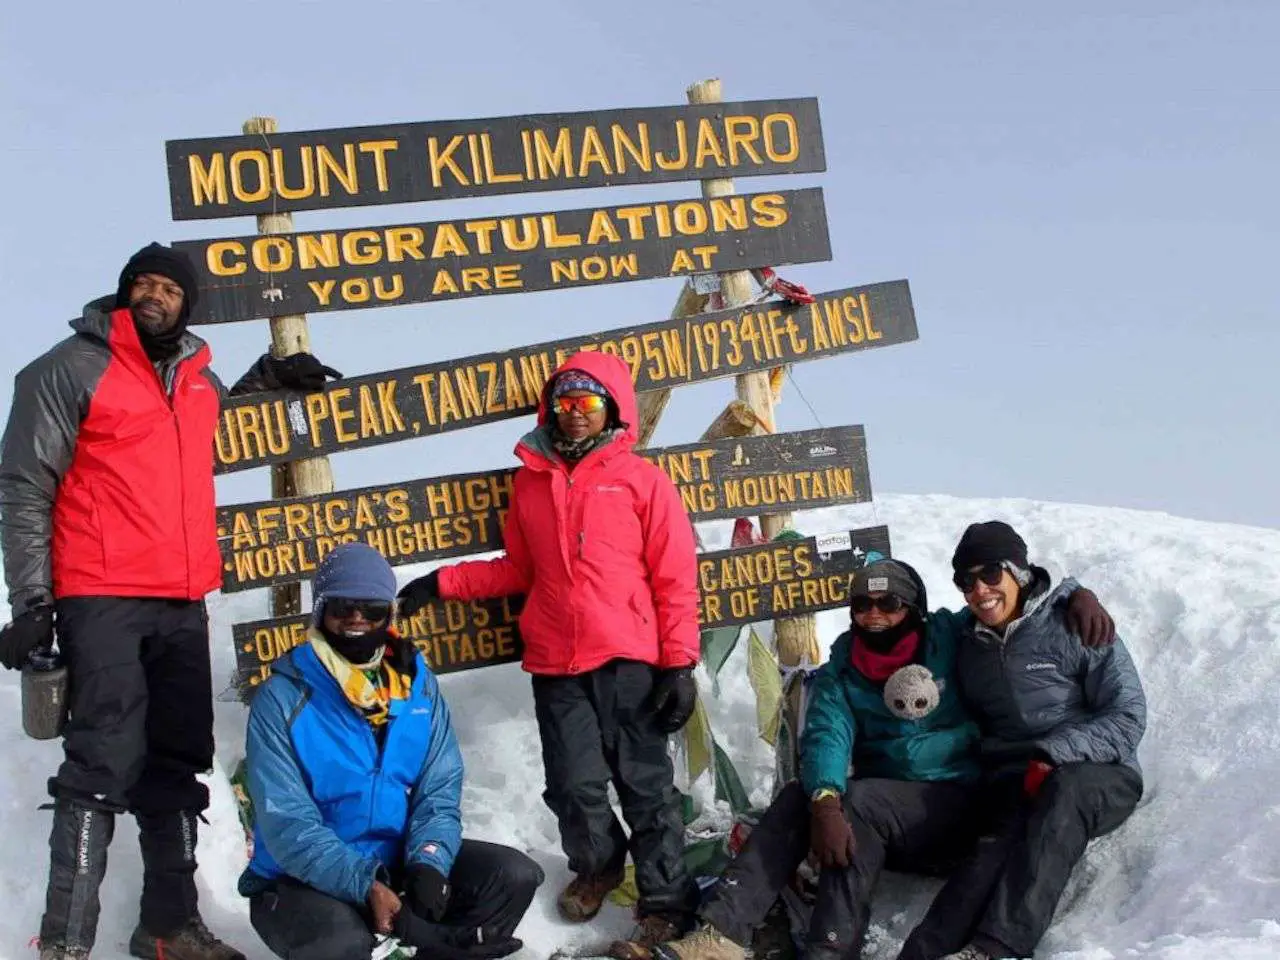 black American expedition that climbs mountains, Mount Kilimanjaro